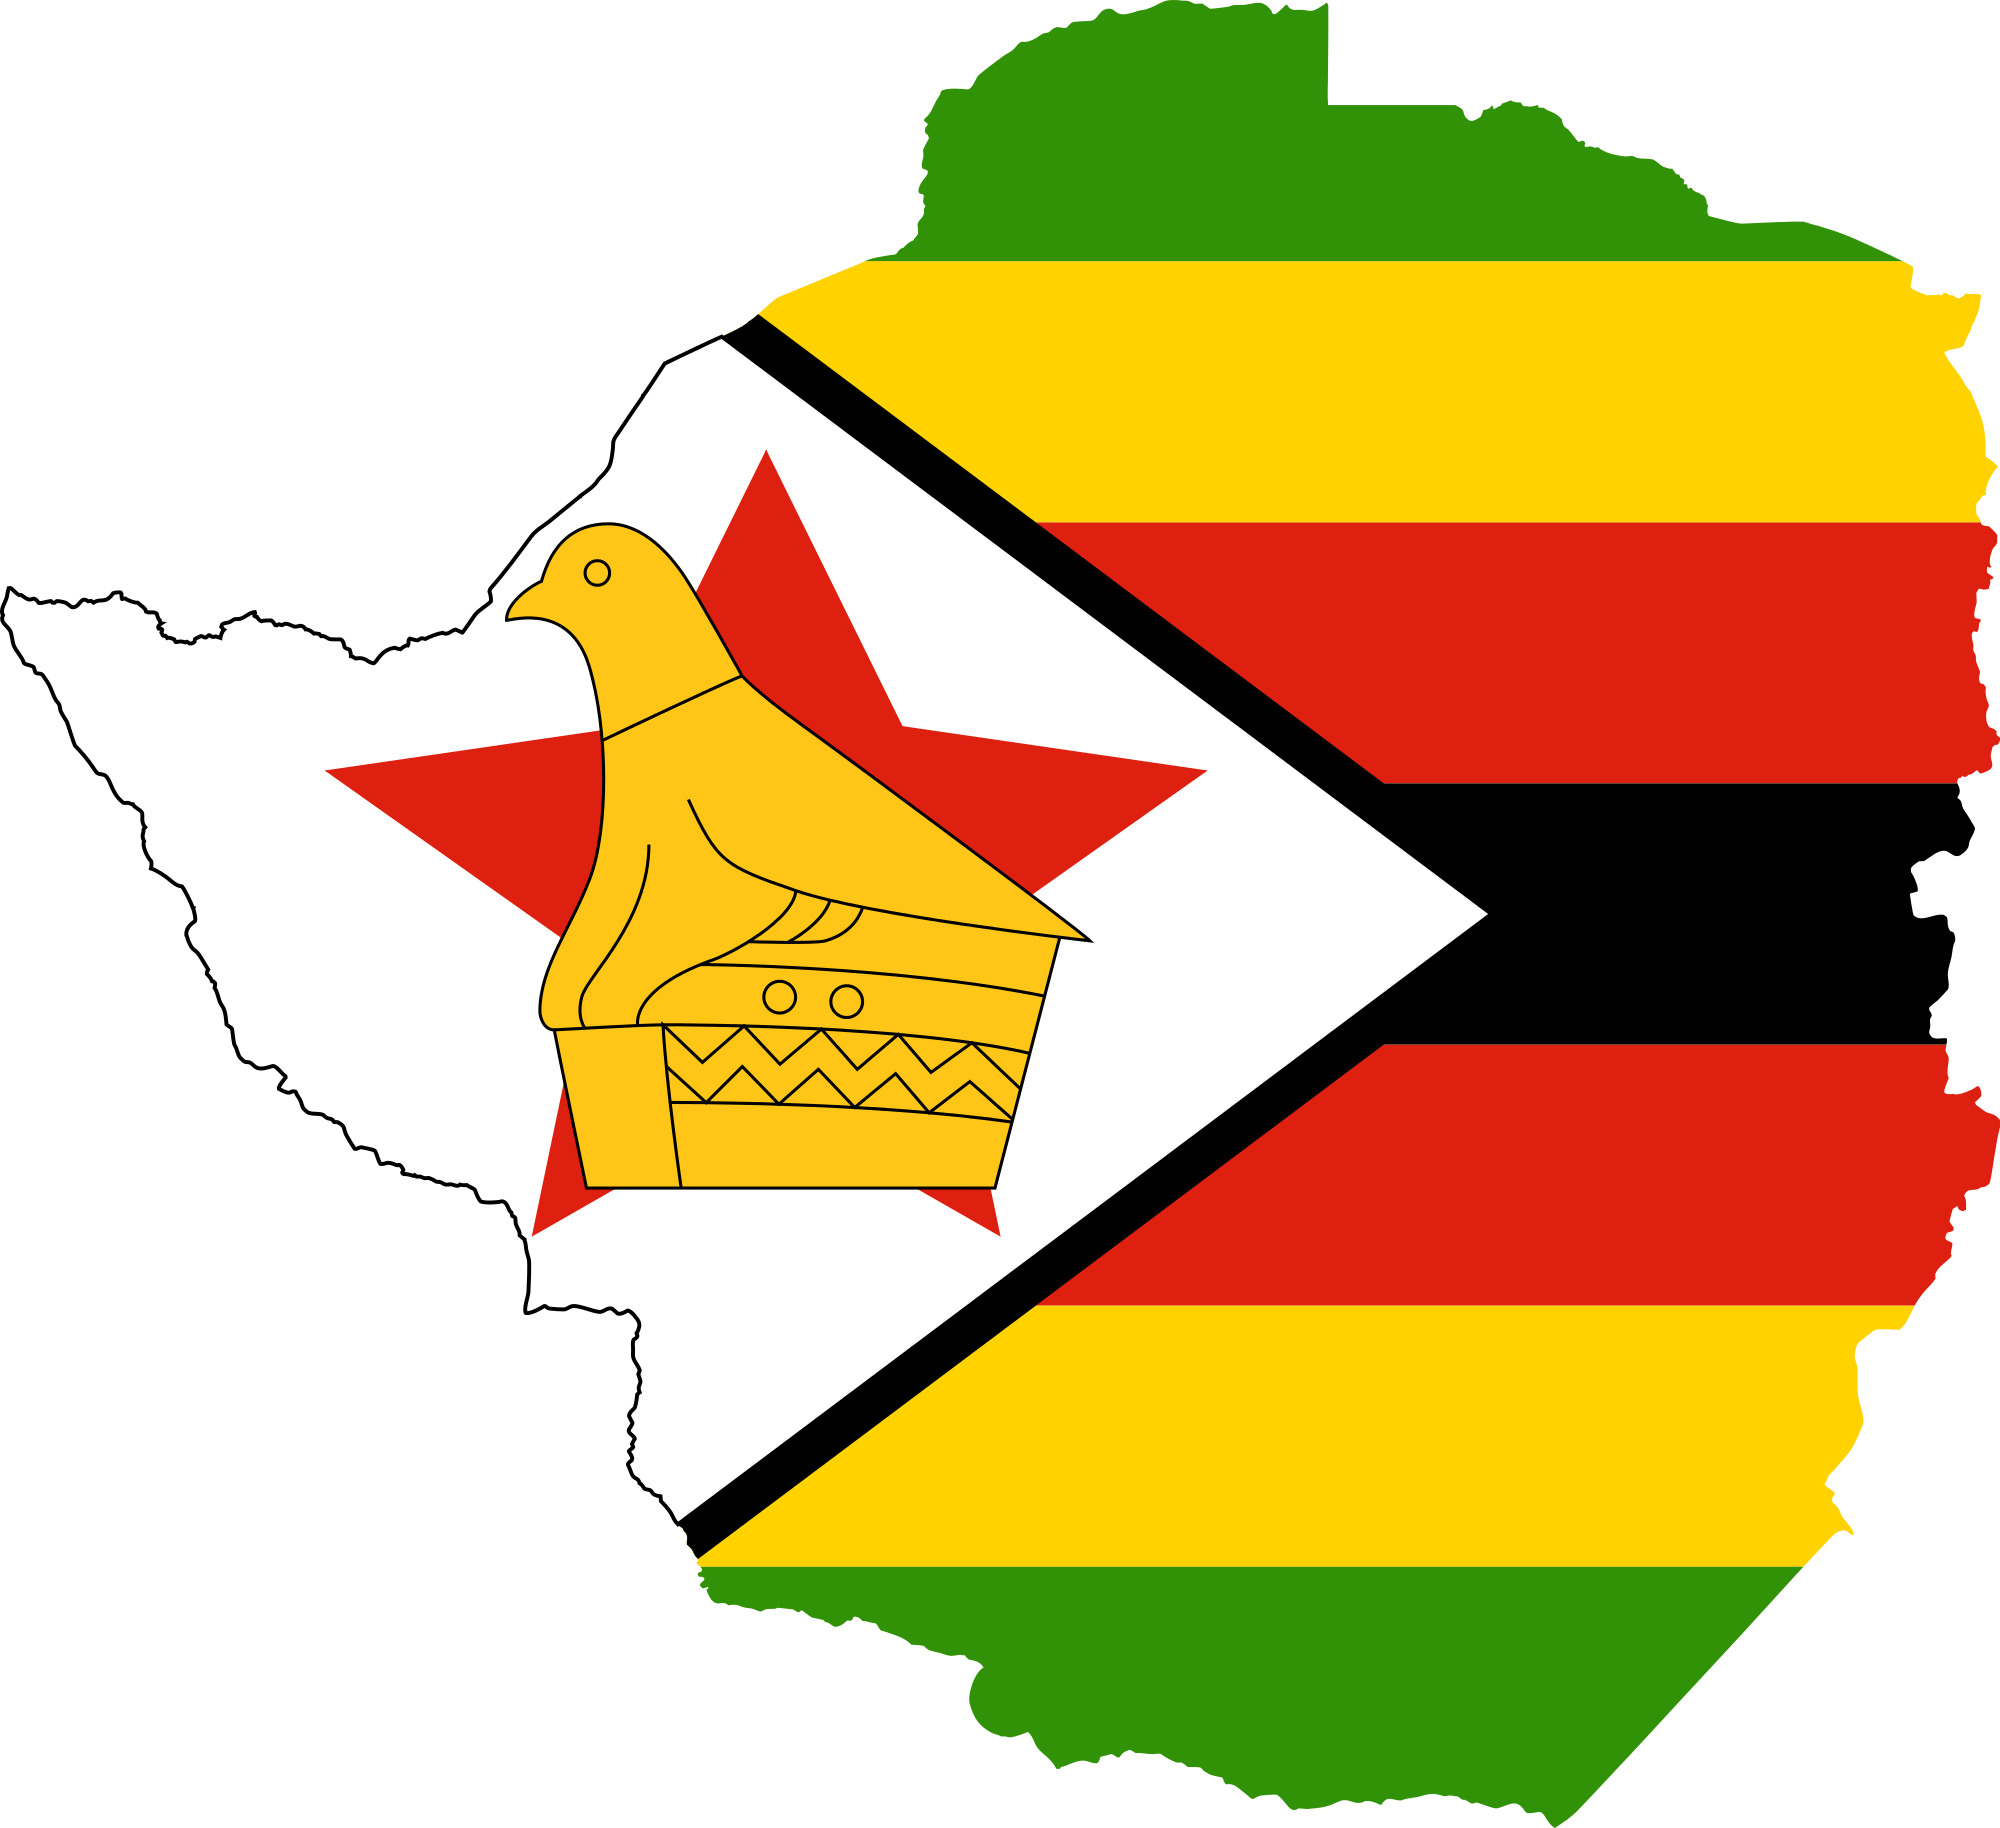 Flag of the Air Force of Zimb